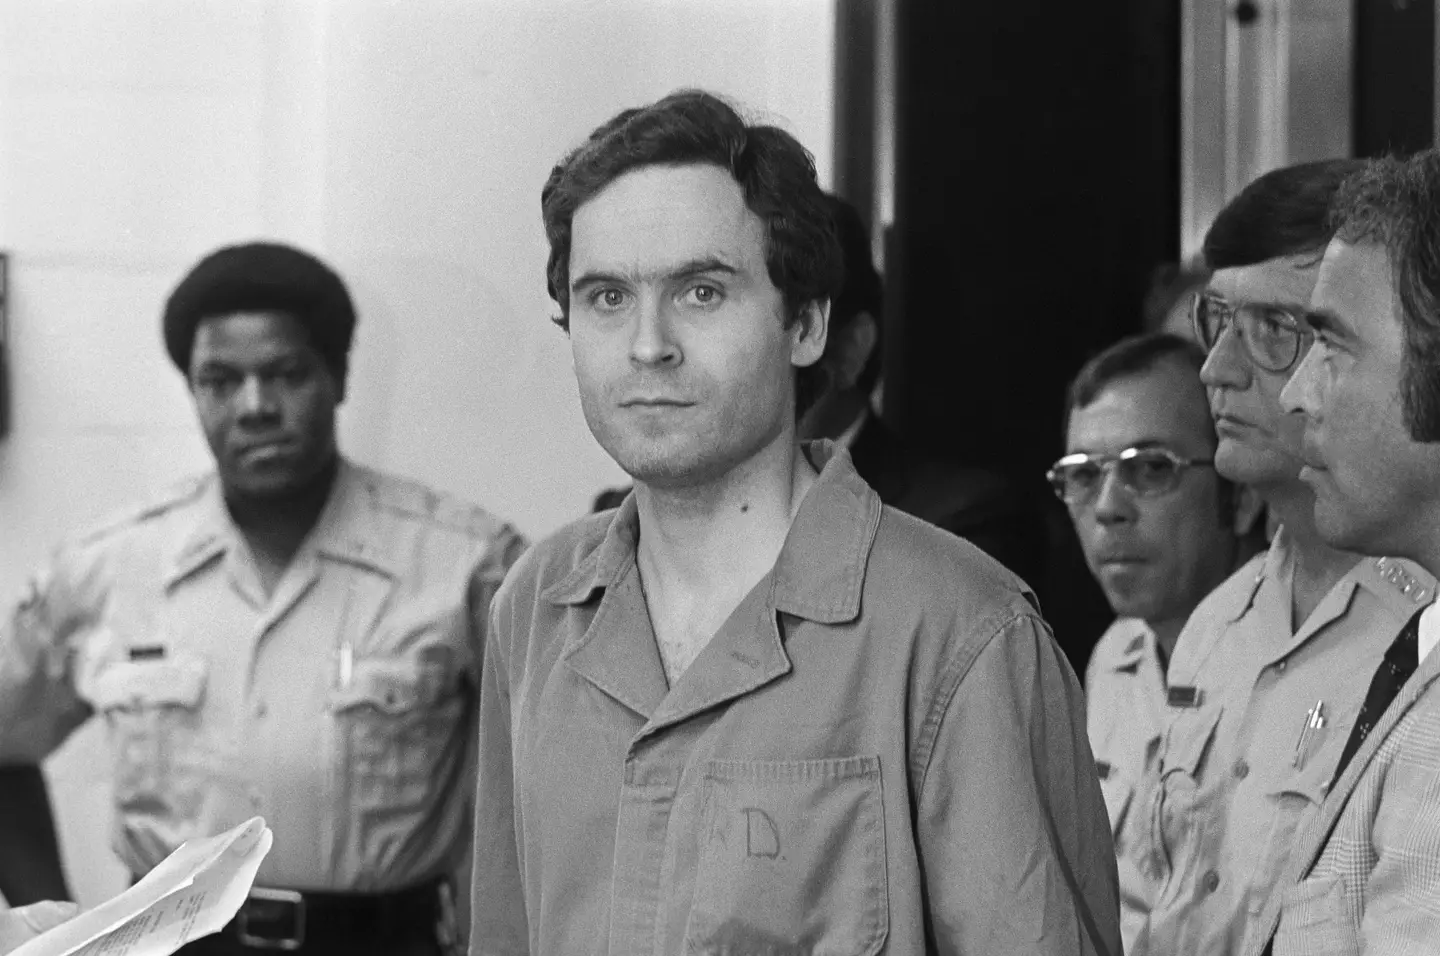 Bundy was executed in 1989.